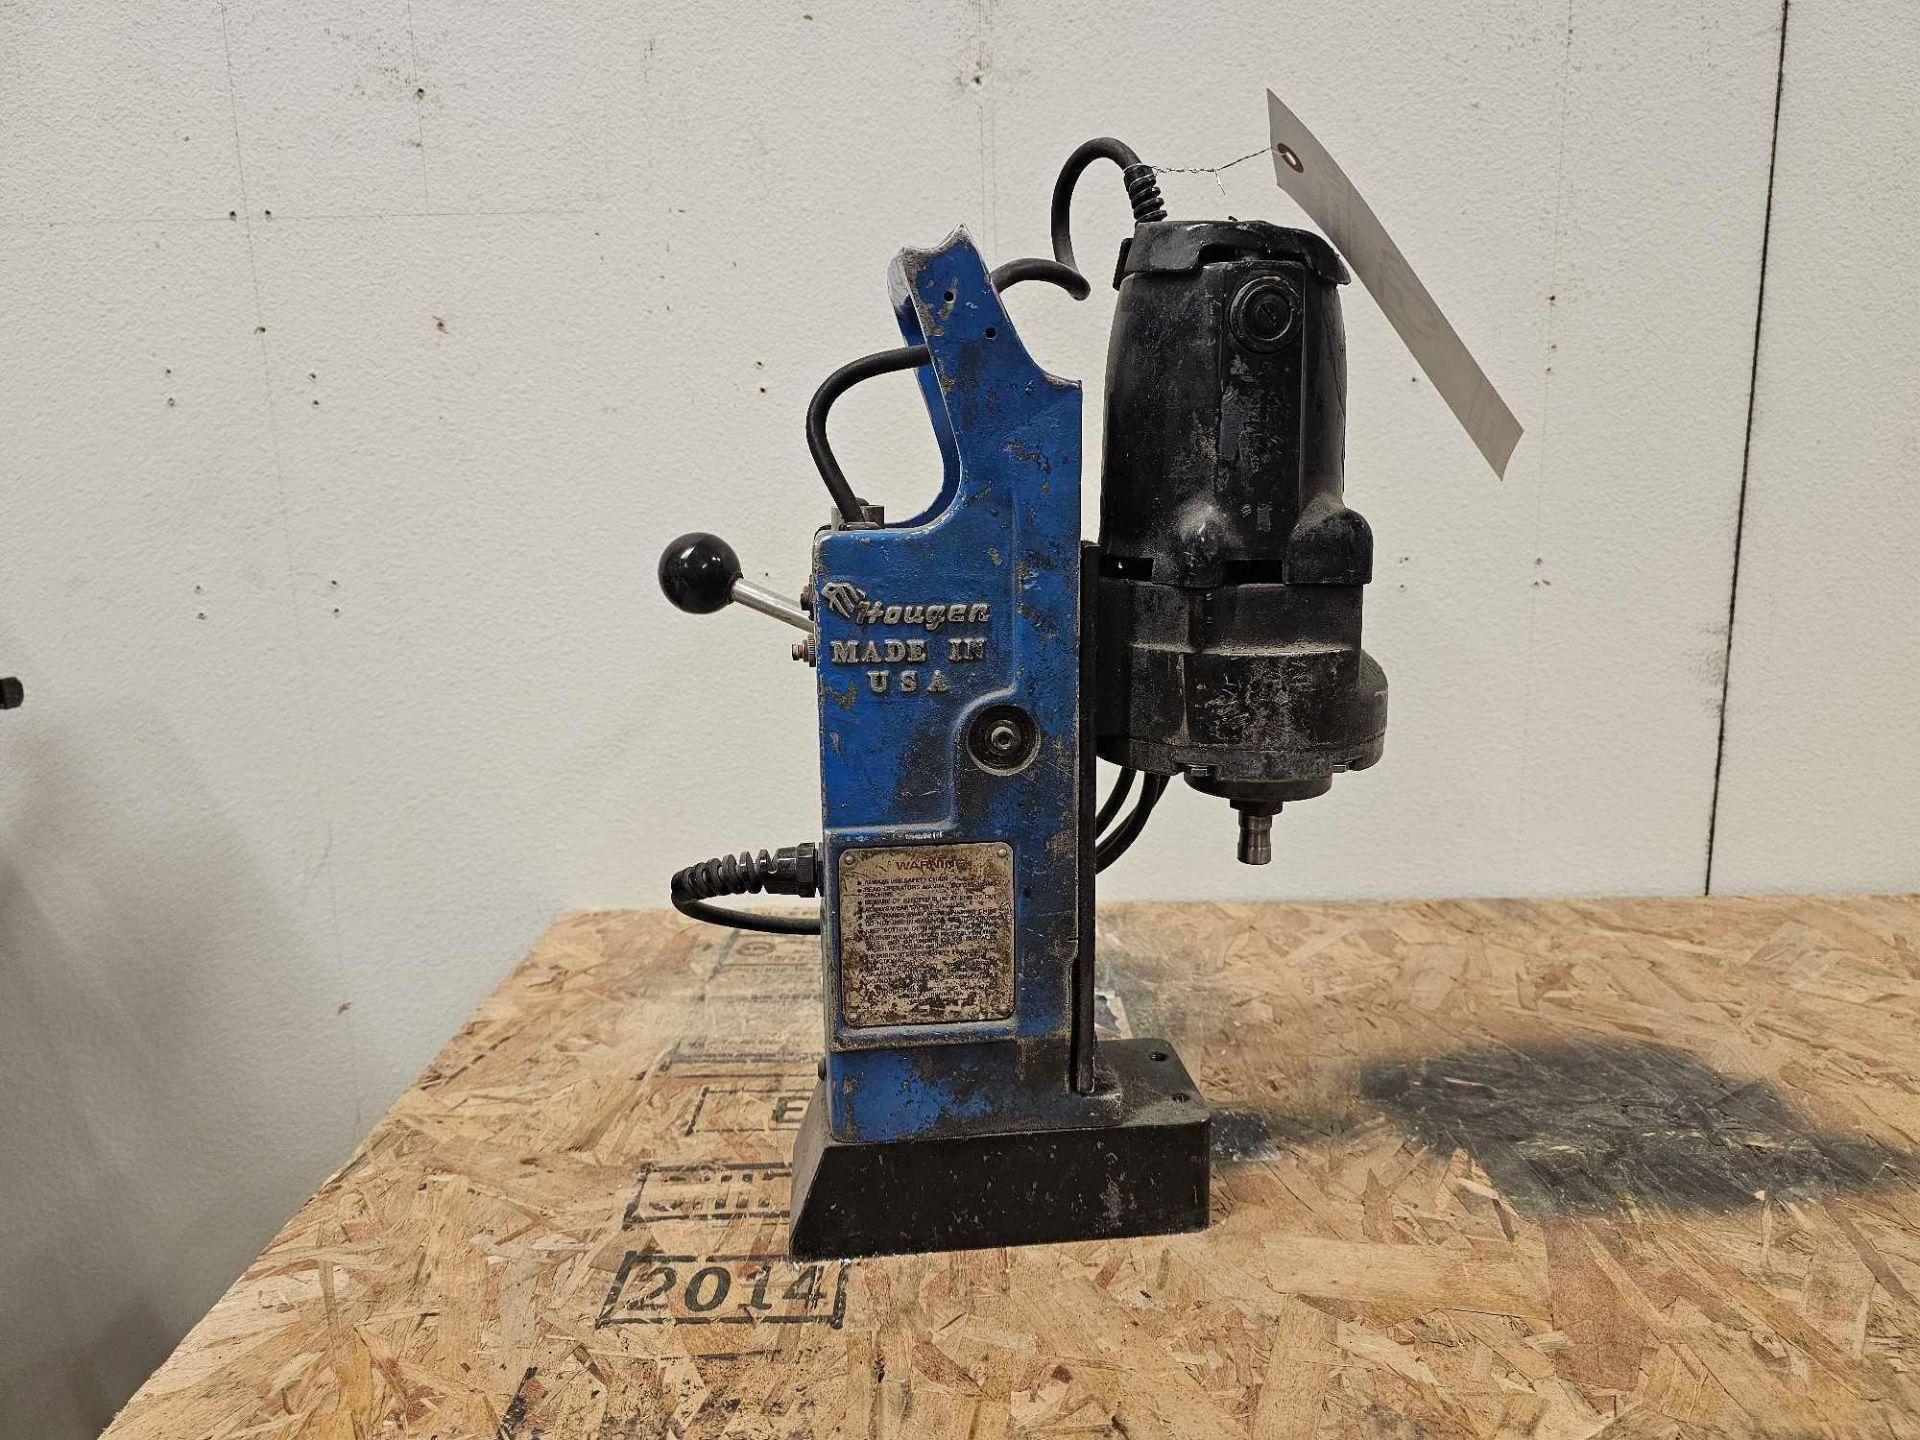 HOUGEN MAG DRILL, MAGNETIC DRILL PRESS - Image 2 of 5